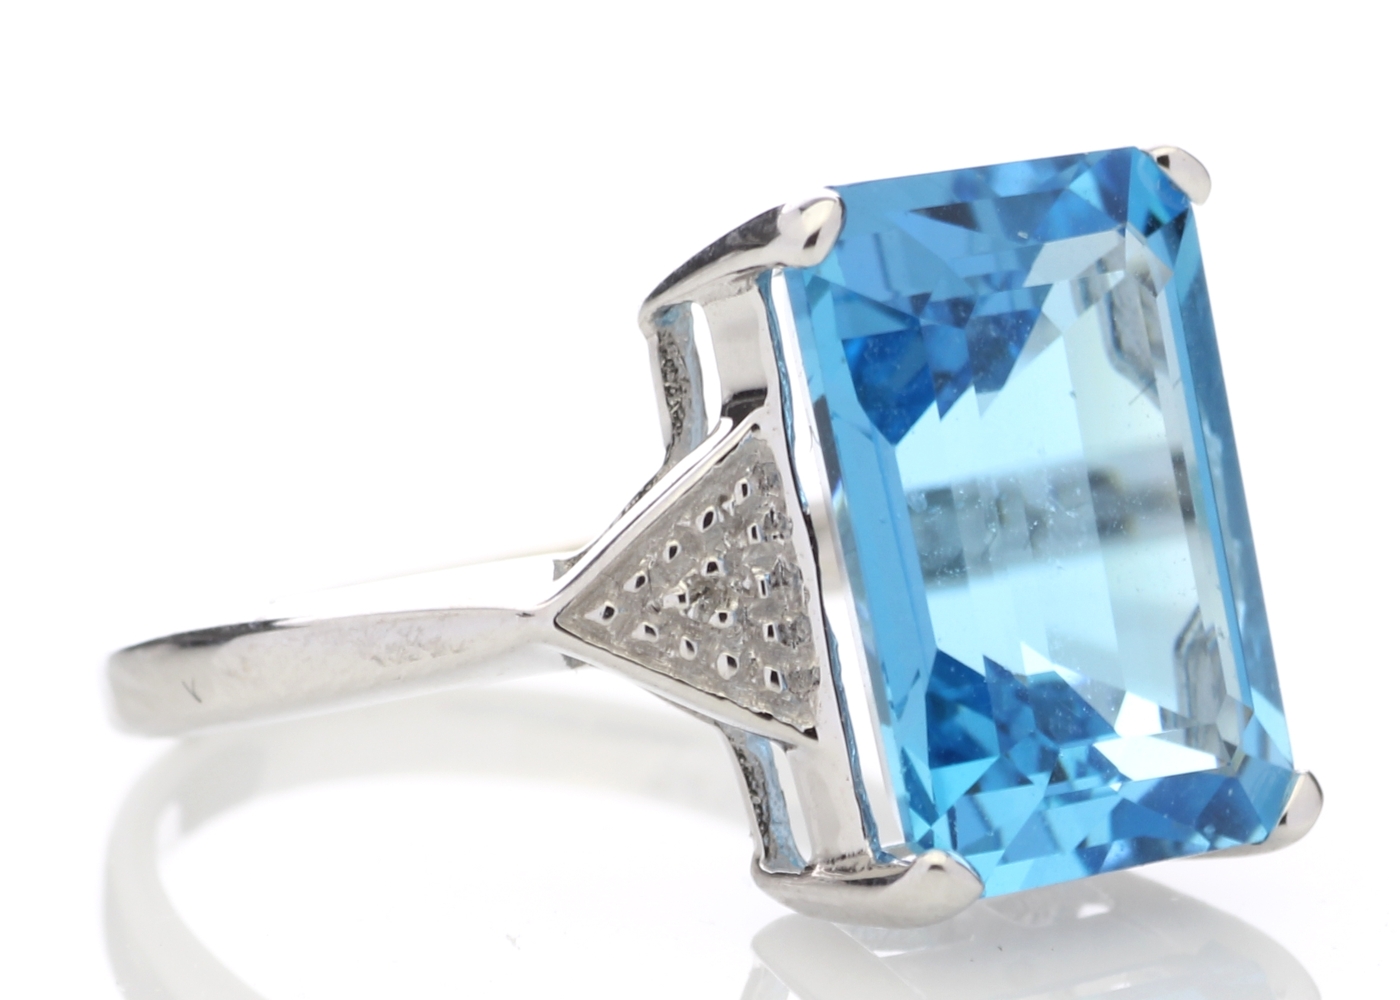 9ct White Gold Diamond And Blue Topaz Ring 8.25 Carats - Image 4 of 6